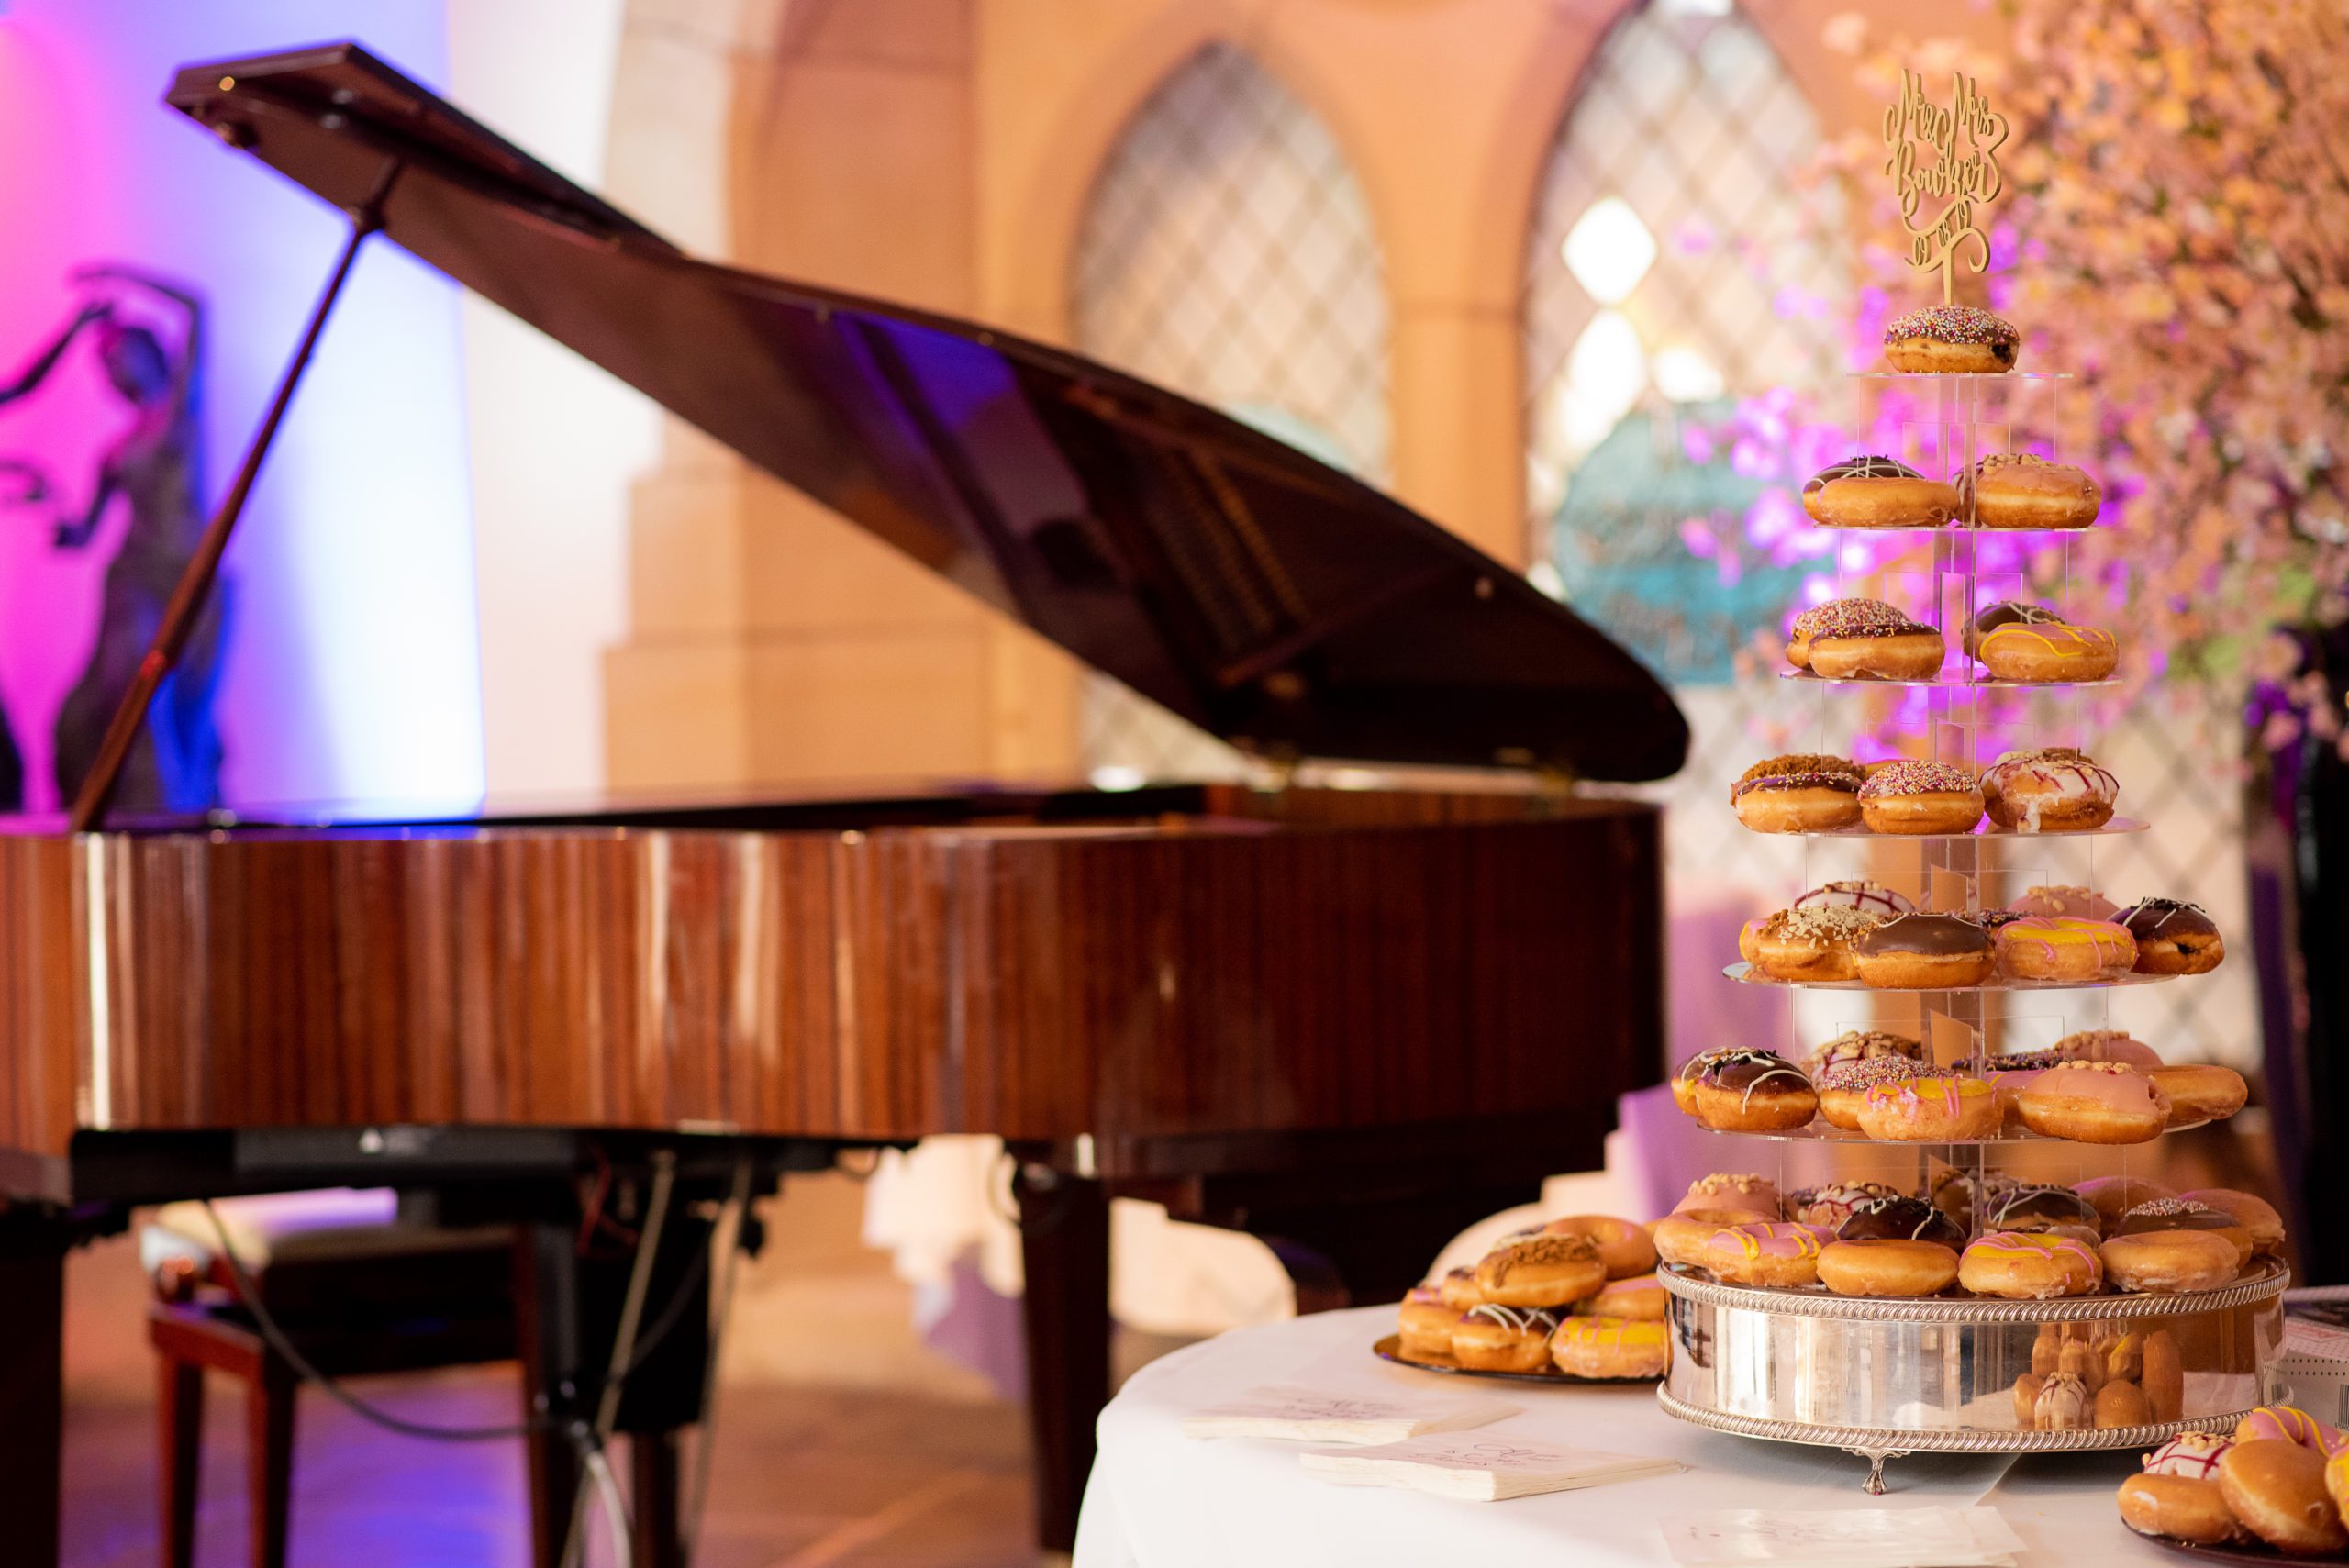 Donut tower by piano at Gibbon Bridge Hotel Ribble Valley